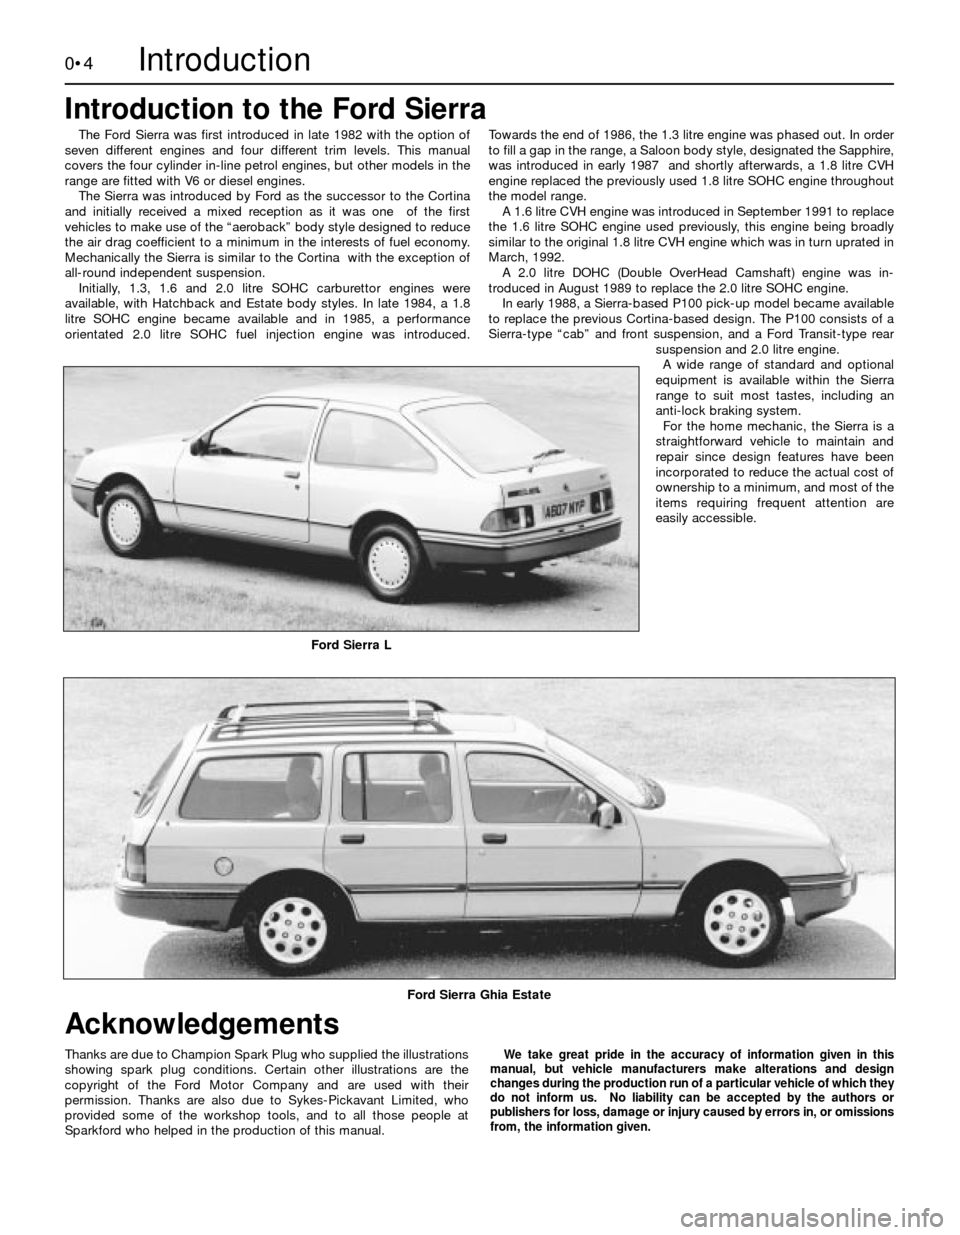 FORD SIERRA 1983 1.G Introduction Workshop Manual 0•4
The Ford Sierra was first introduced in late 1982 with the option of
seven different engines and four different trim levels. This manual
covers the four cylinder in-line petrol engines, but othe